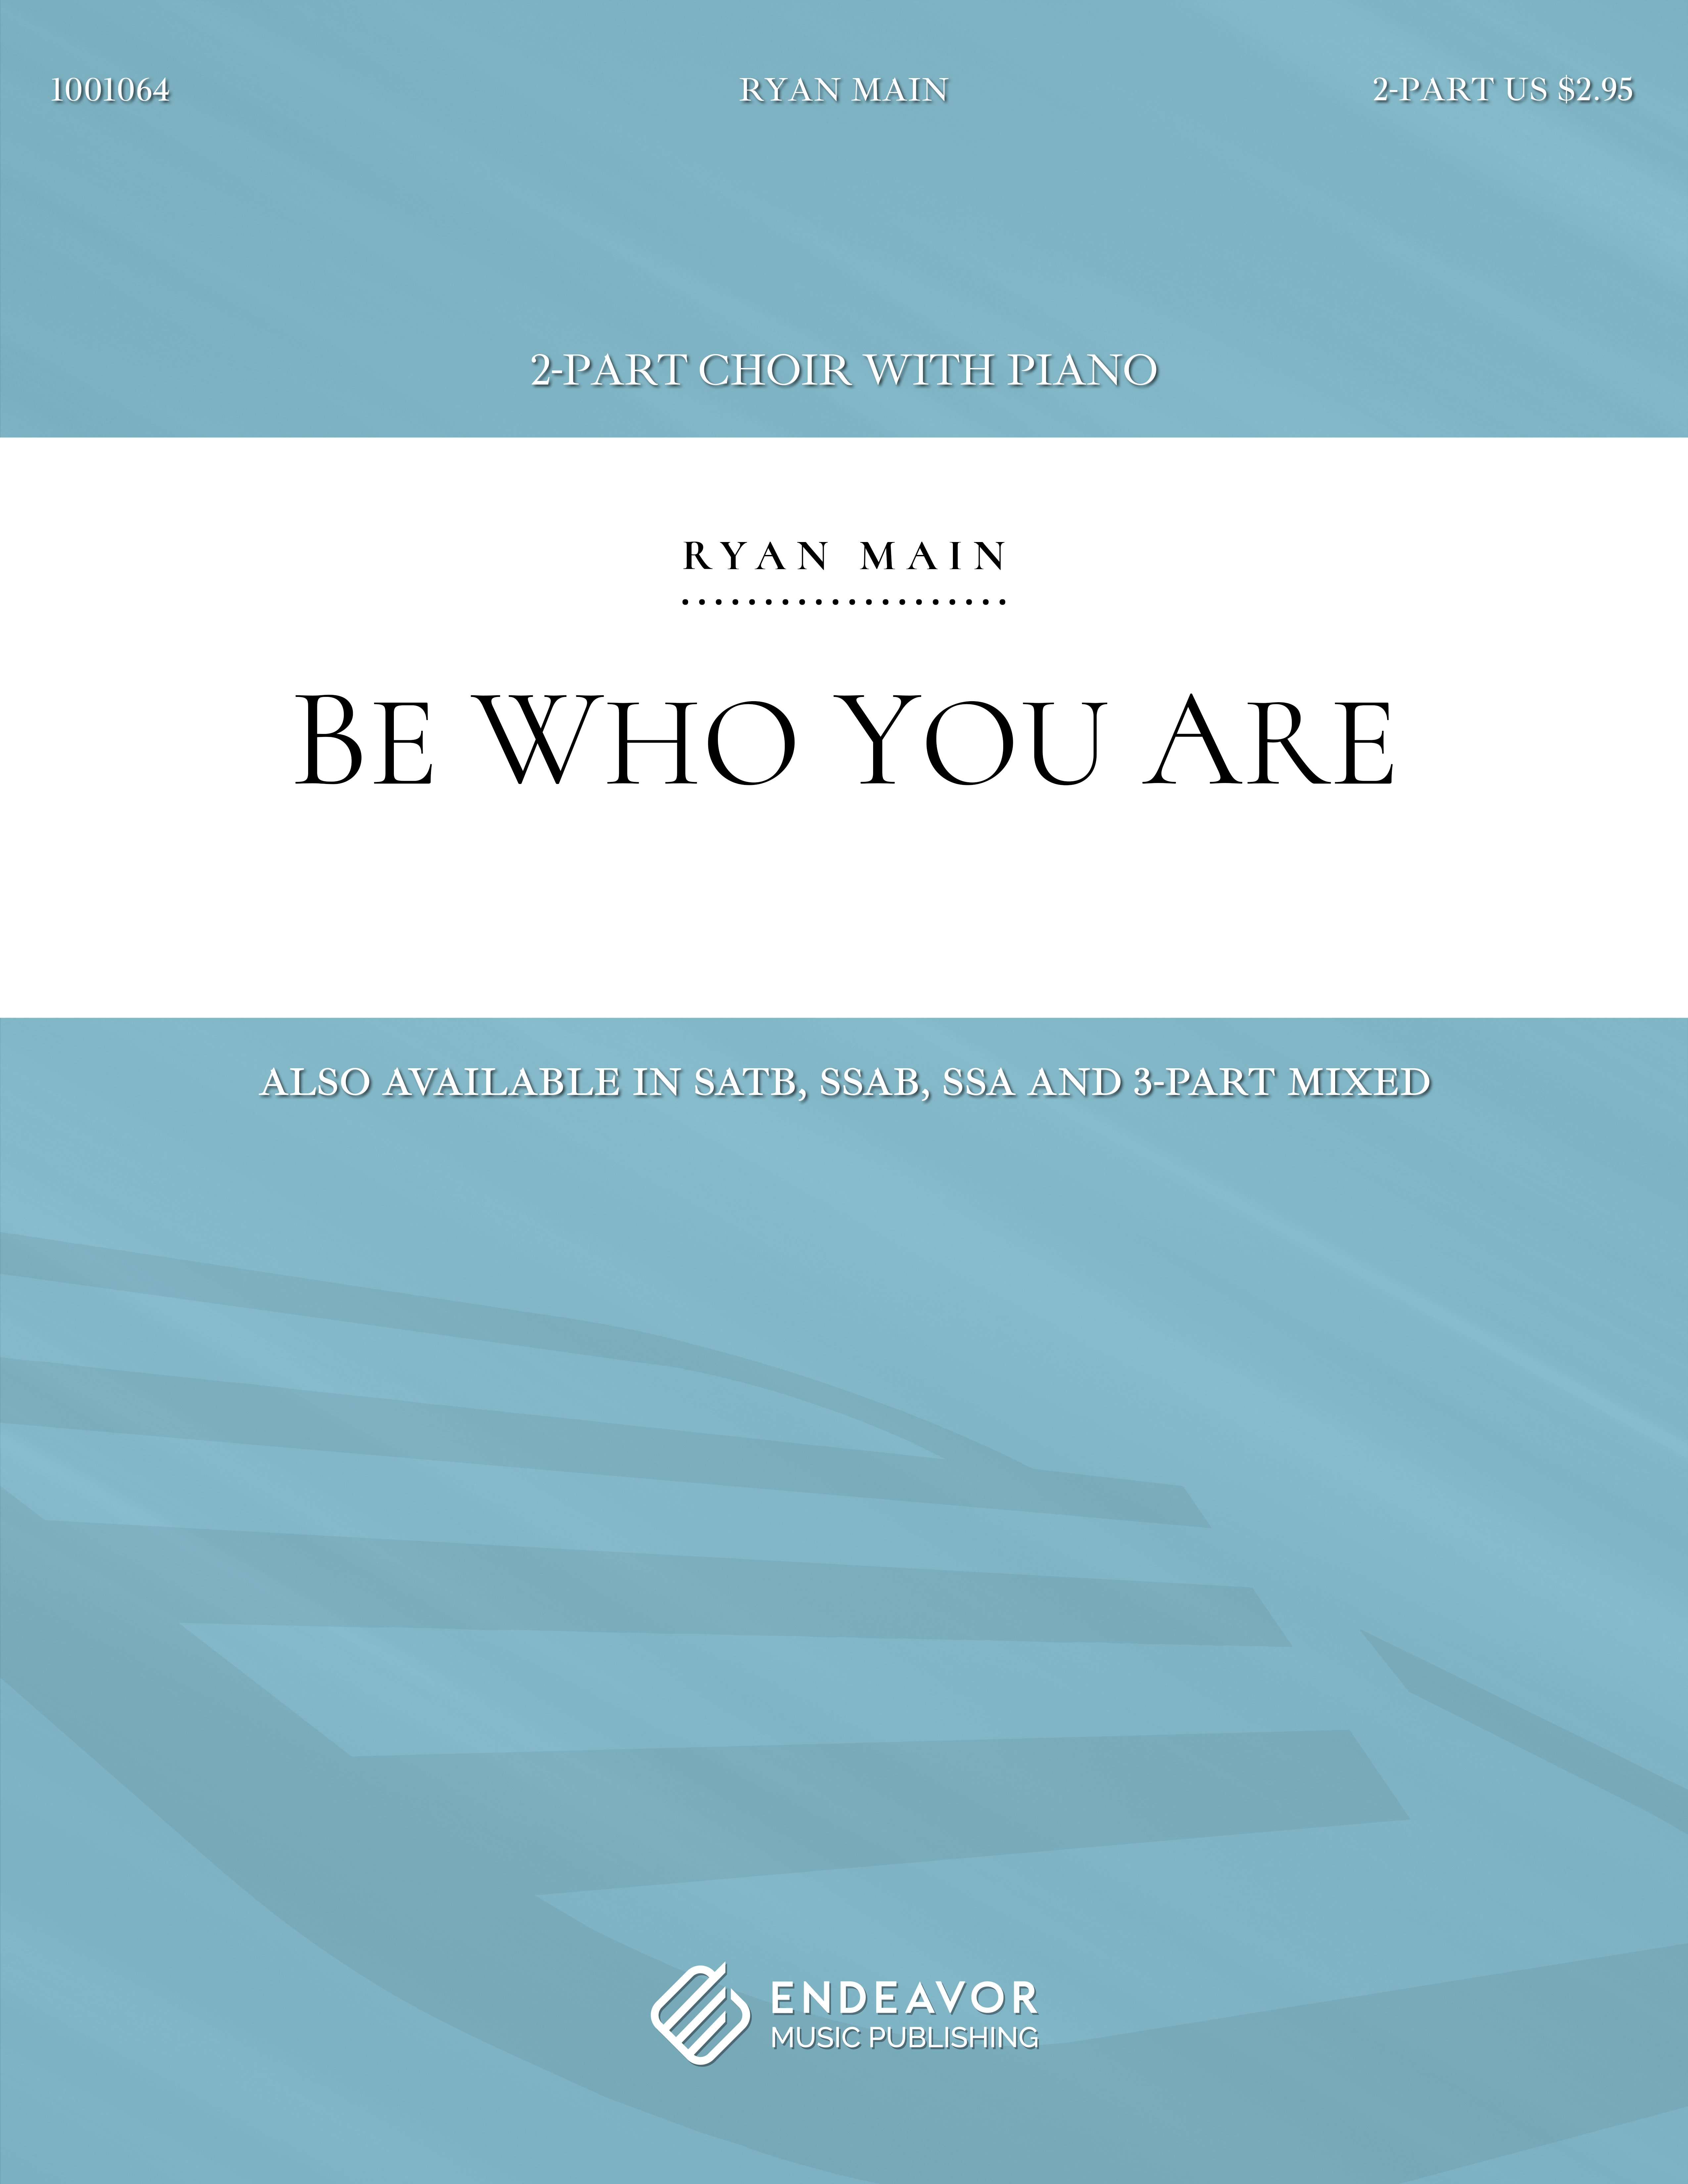 Be Who You Are band sheet music cover